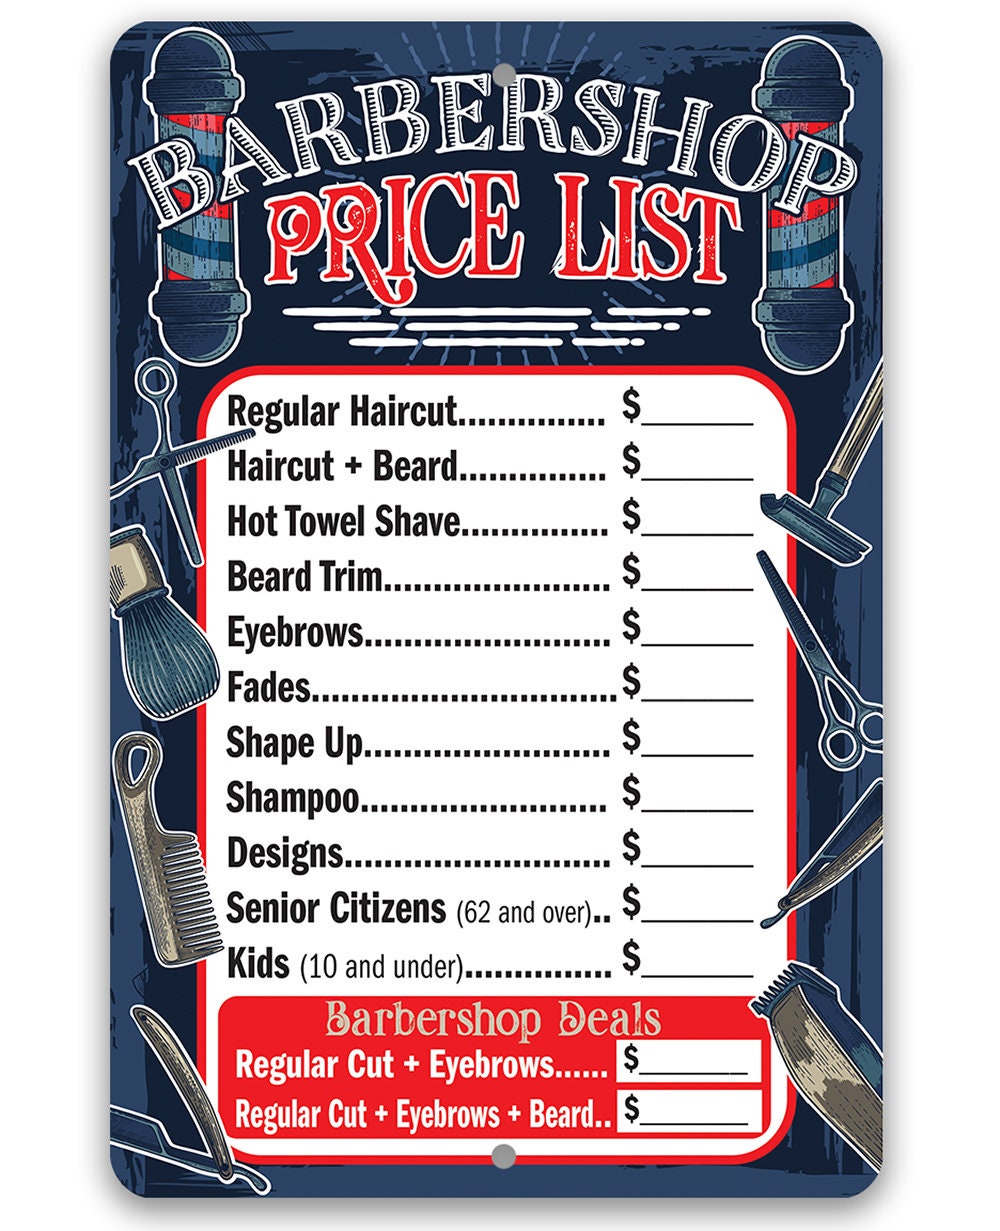 Barbershop Price List 8 X 12 Or 12 X 18 Aluminum Tin Awesome Metal Poster Lone Star Art 461026 ?v=1660917313